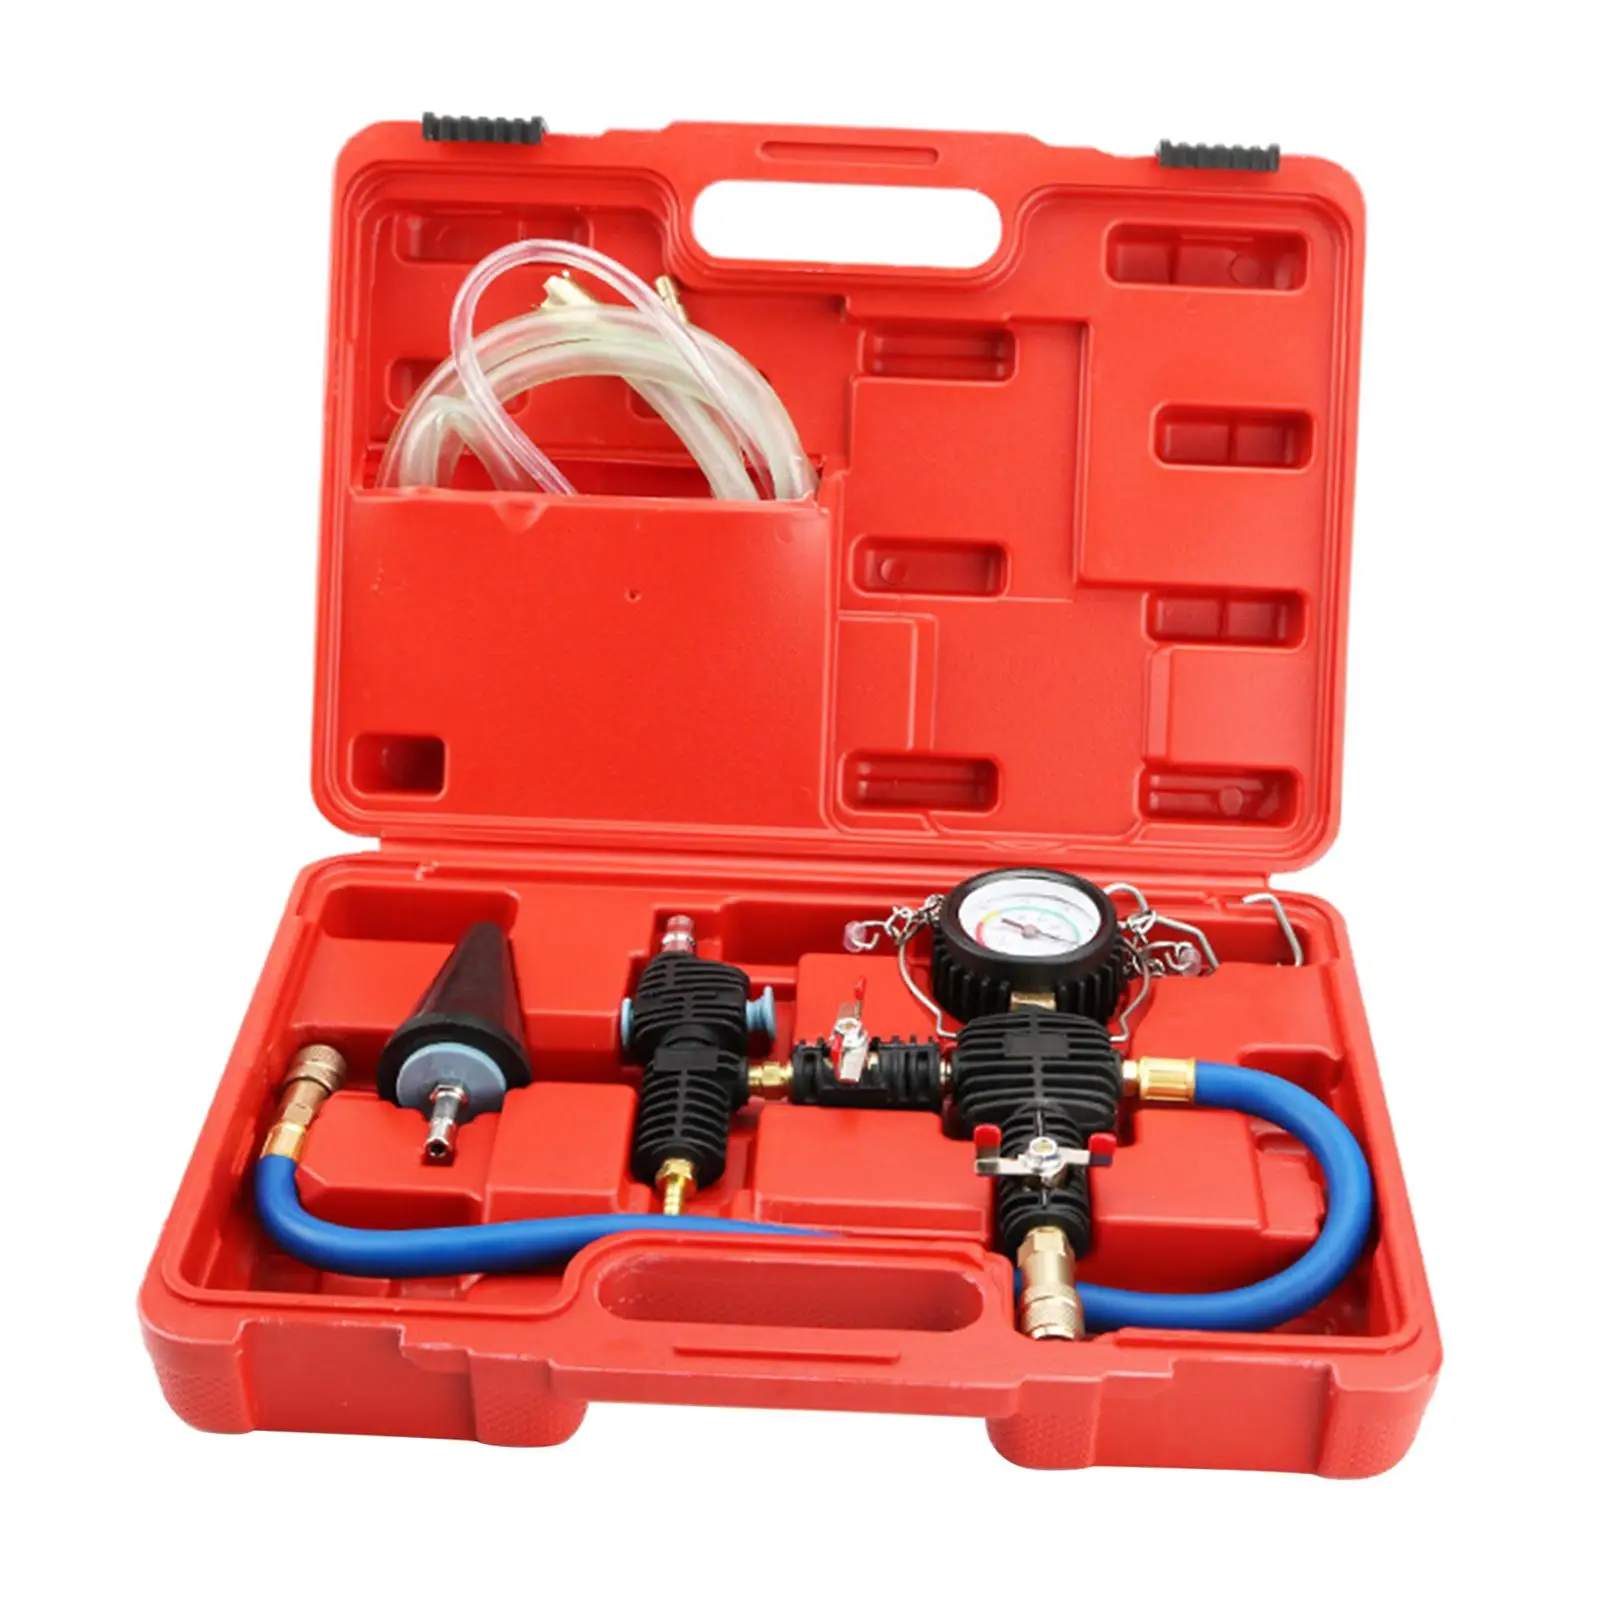 Vacuum Purge Coolant Refill Tool Water Tank Vacuum Antifreeze Filler Set Replace Tool Set with Hose for Automotive SUV Car Truck